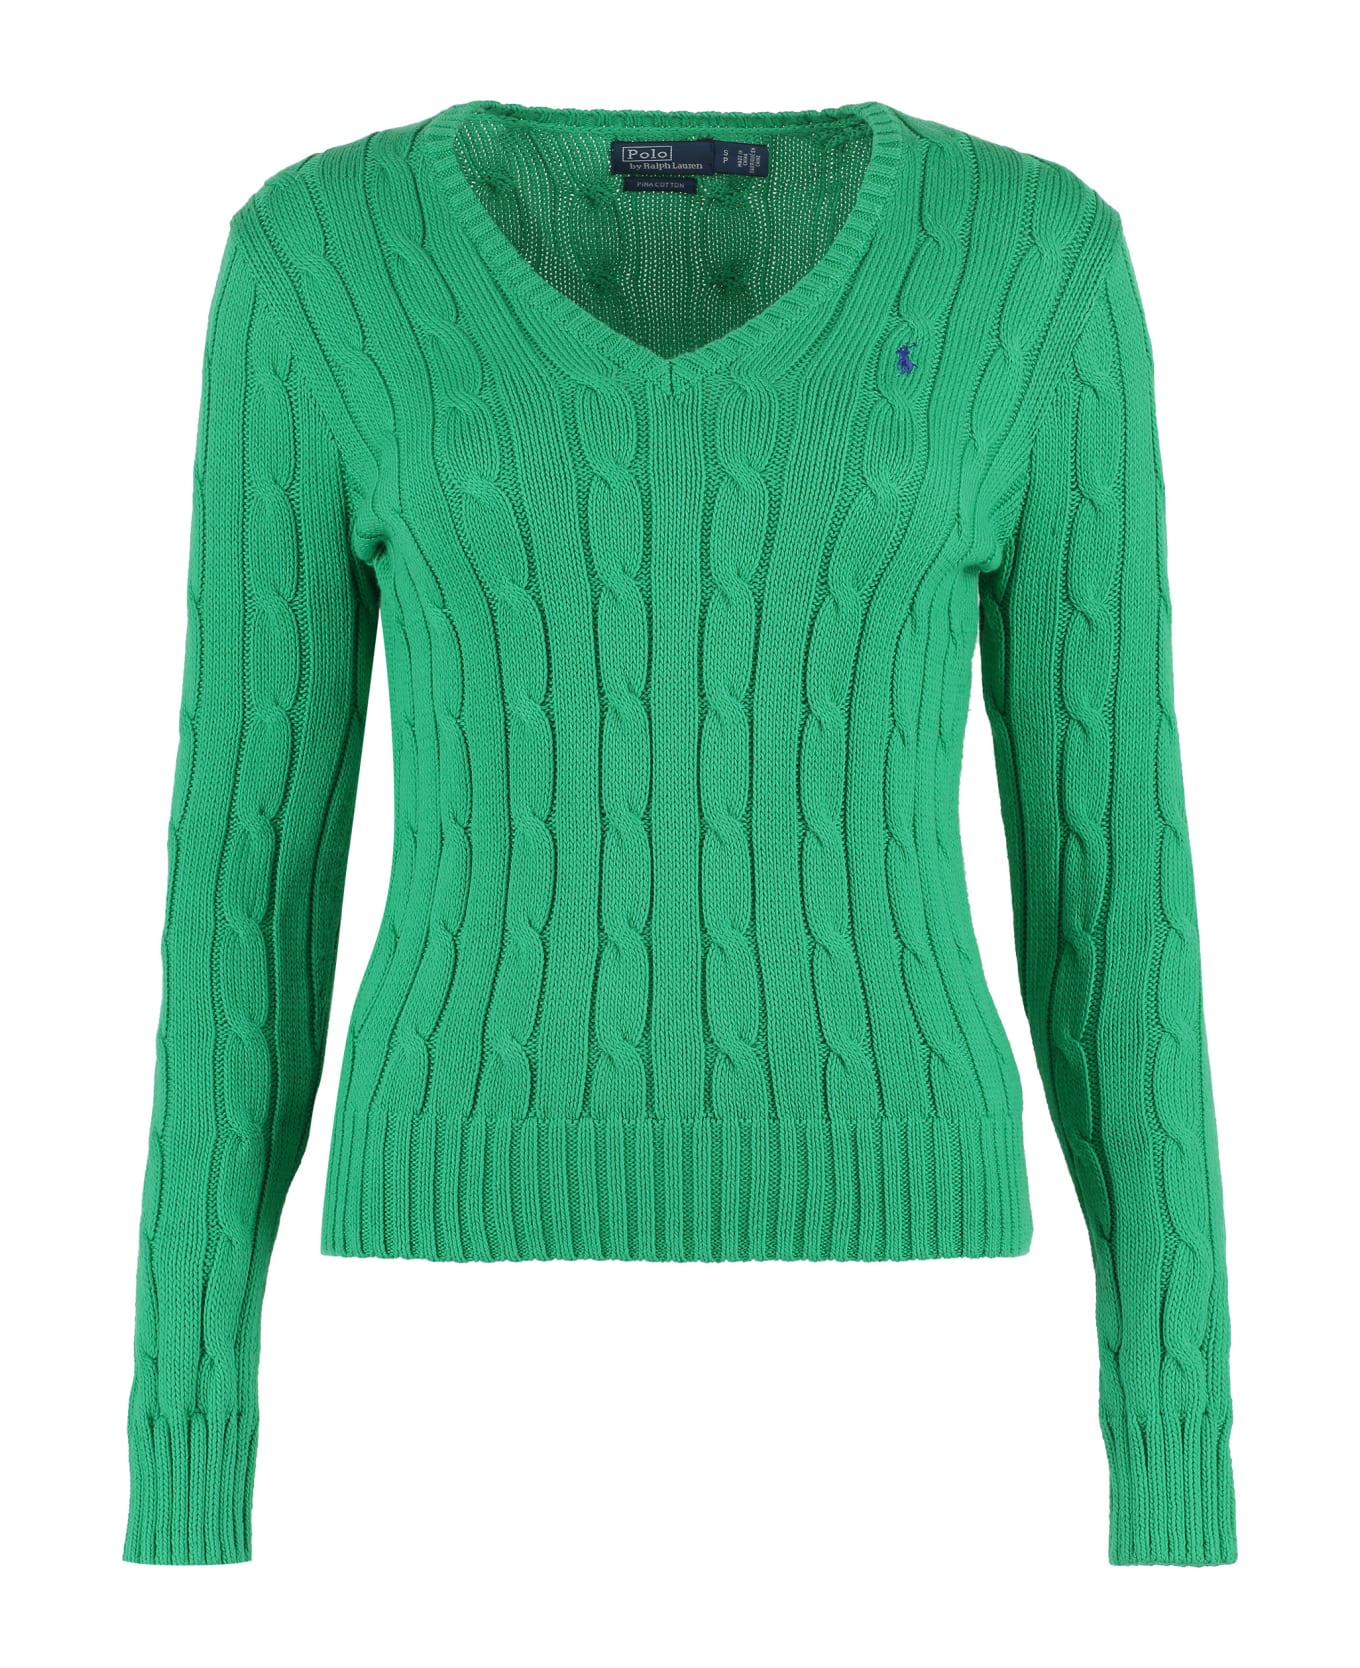 Ralph Lauren Cable Knit Sweater - Preppy Green